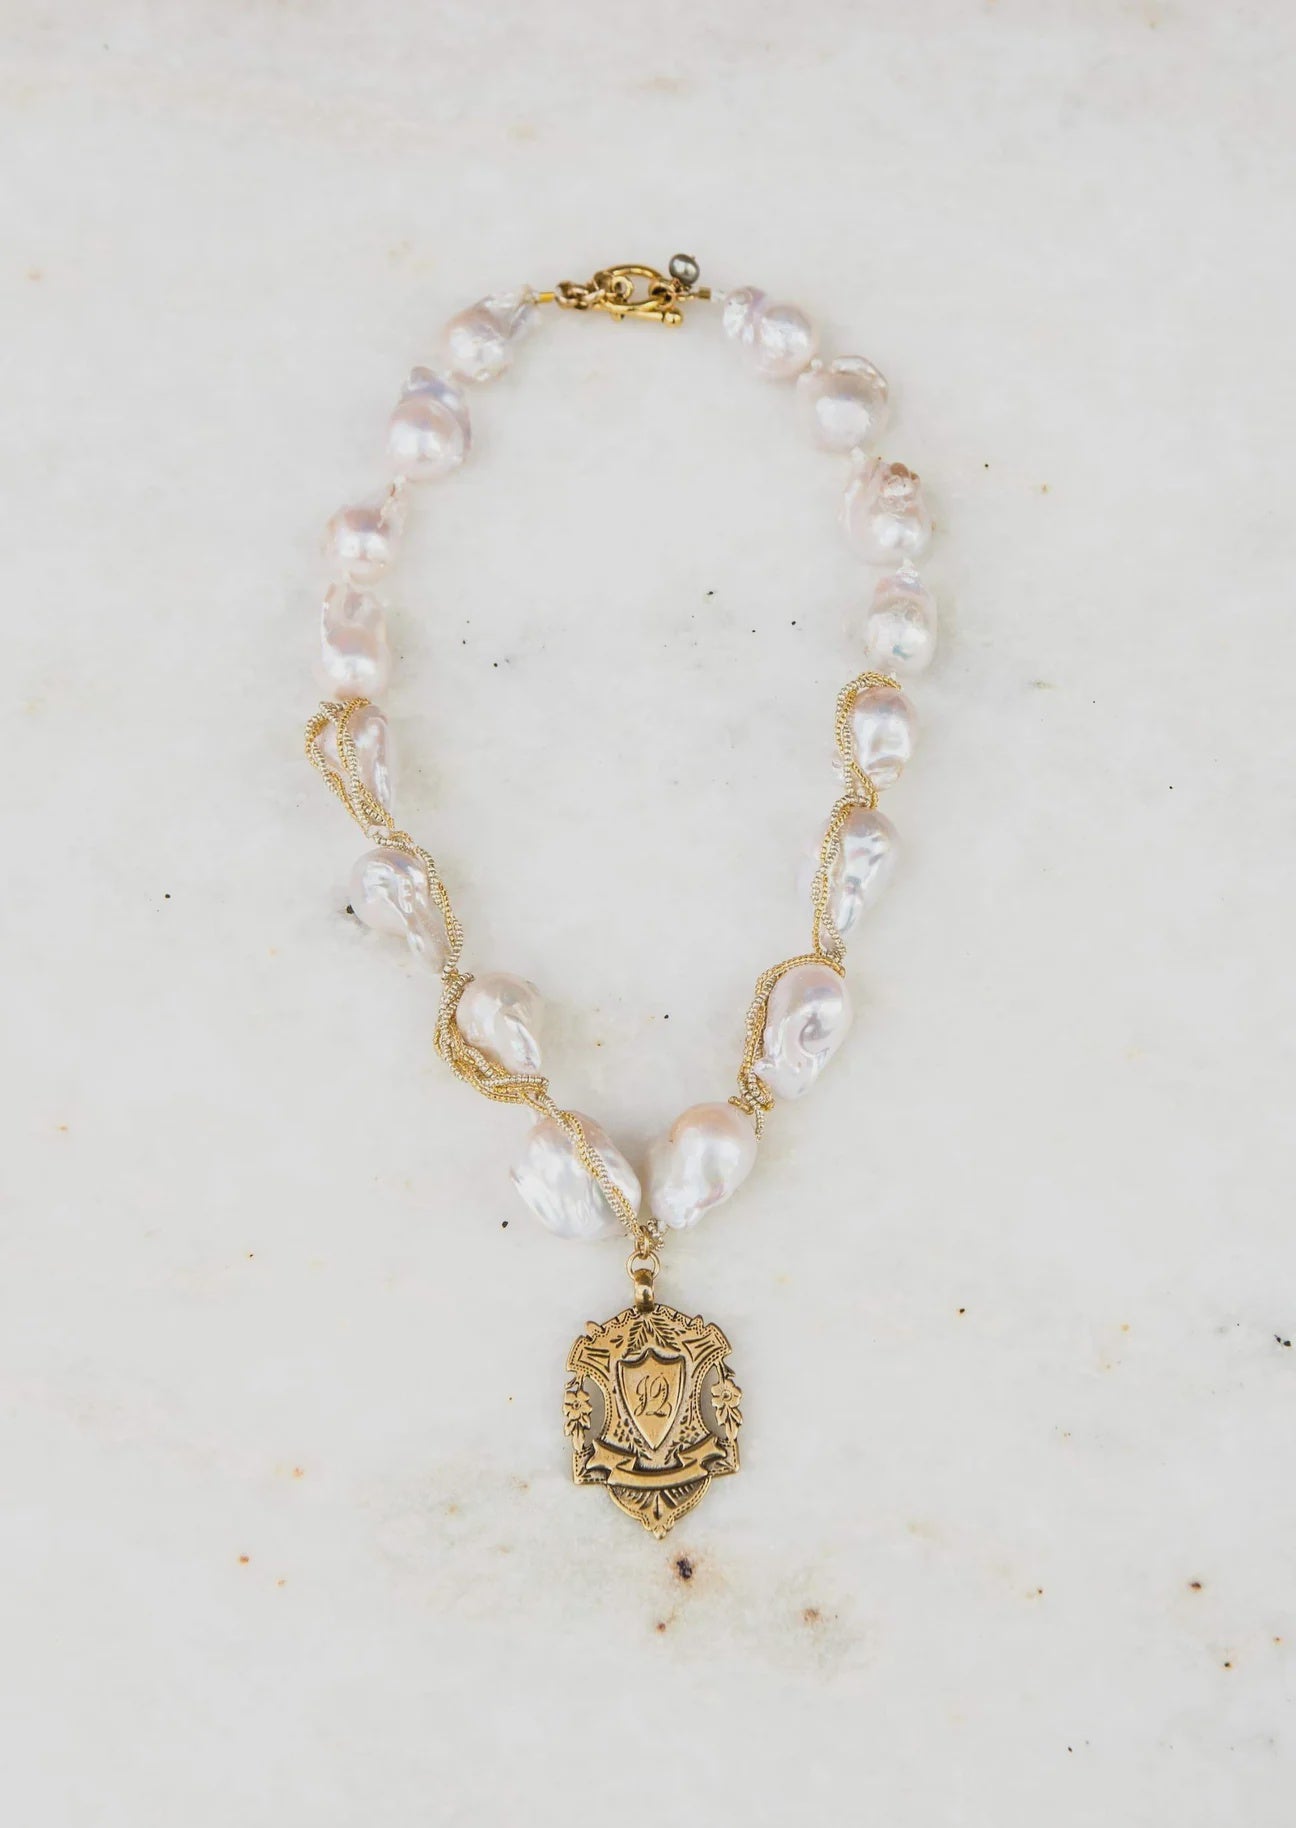 Elegant necklace featuring large baroque pearls interspersed with twisted gold links, centered by an Wrapped Ivory Pearl &amp; Shield pendant displaying a vintage Arizona style, on a white marble background by Bittersweet Designs.